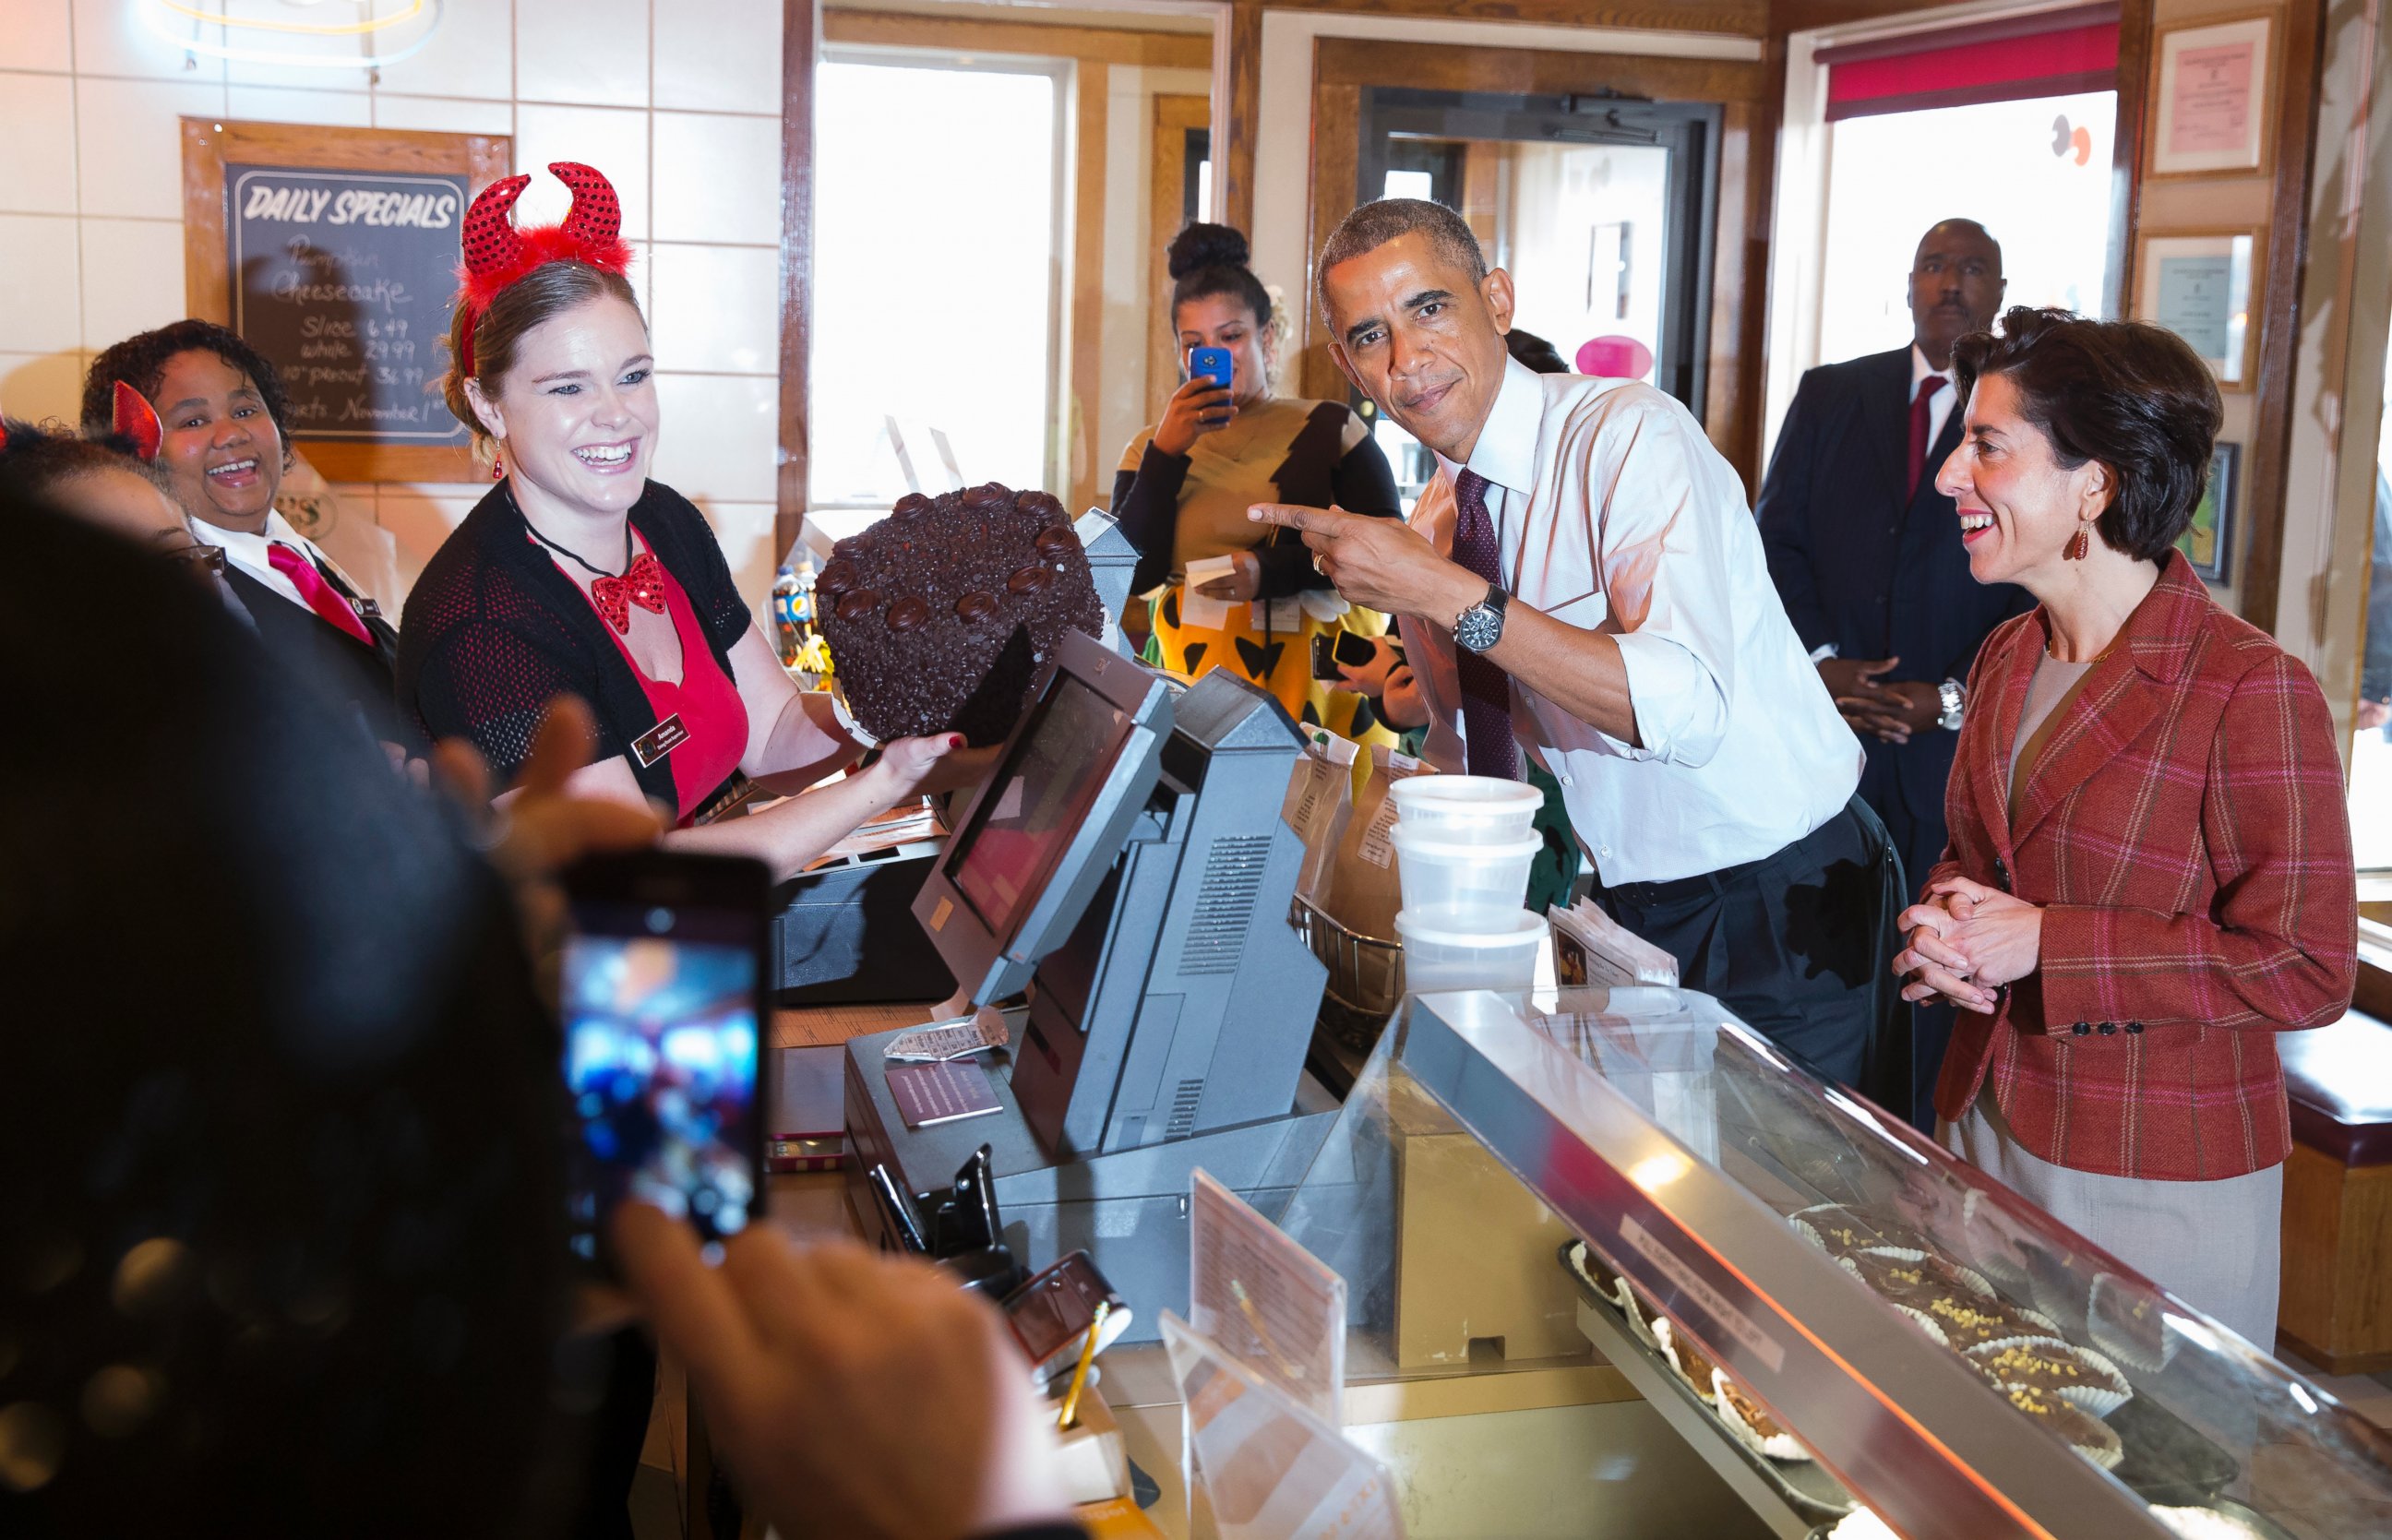 PHOTO: Amanda Schroeder holds a cake President Barack Obama ordered called "Death by Chocolate" while campaigning with Rhode Island Democratic gubernatorial candidate Gina Raimondo, Oct. 31, 2014, at Gregg's Restaurant and Pub in Providence, R.I.